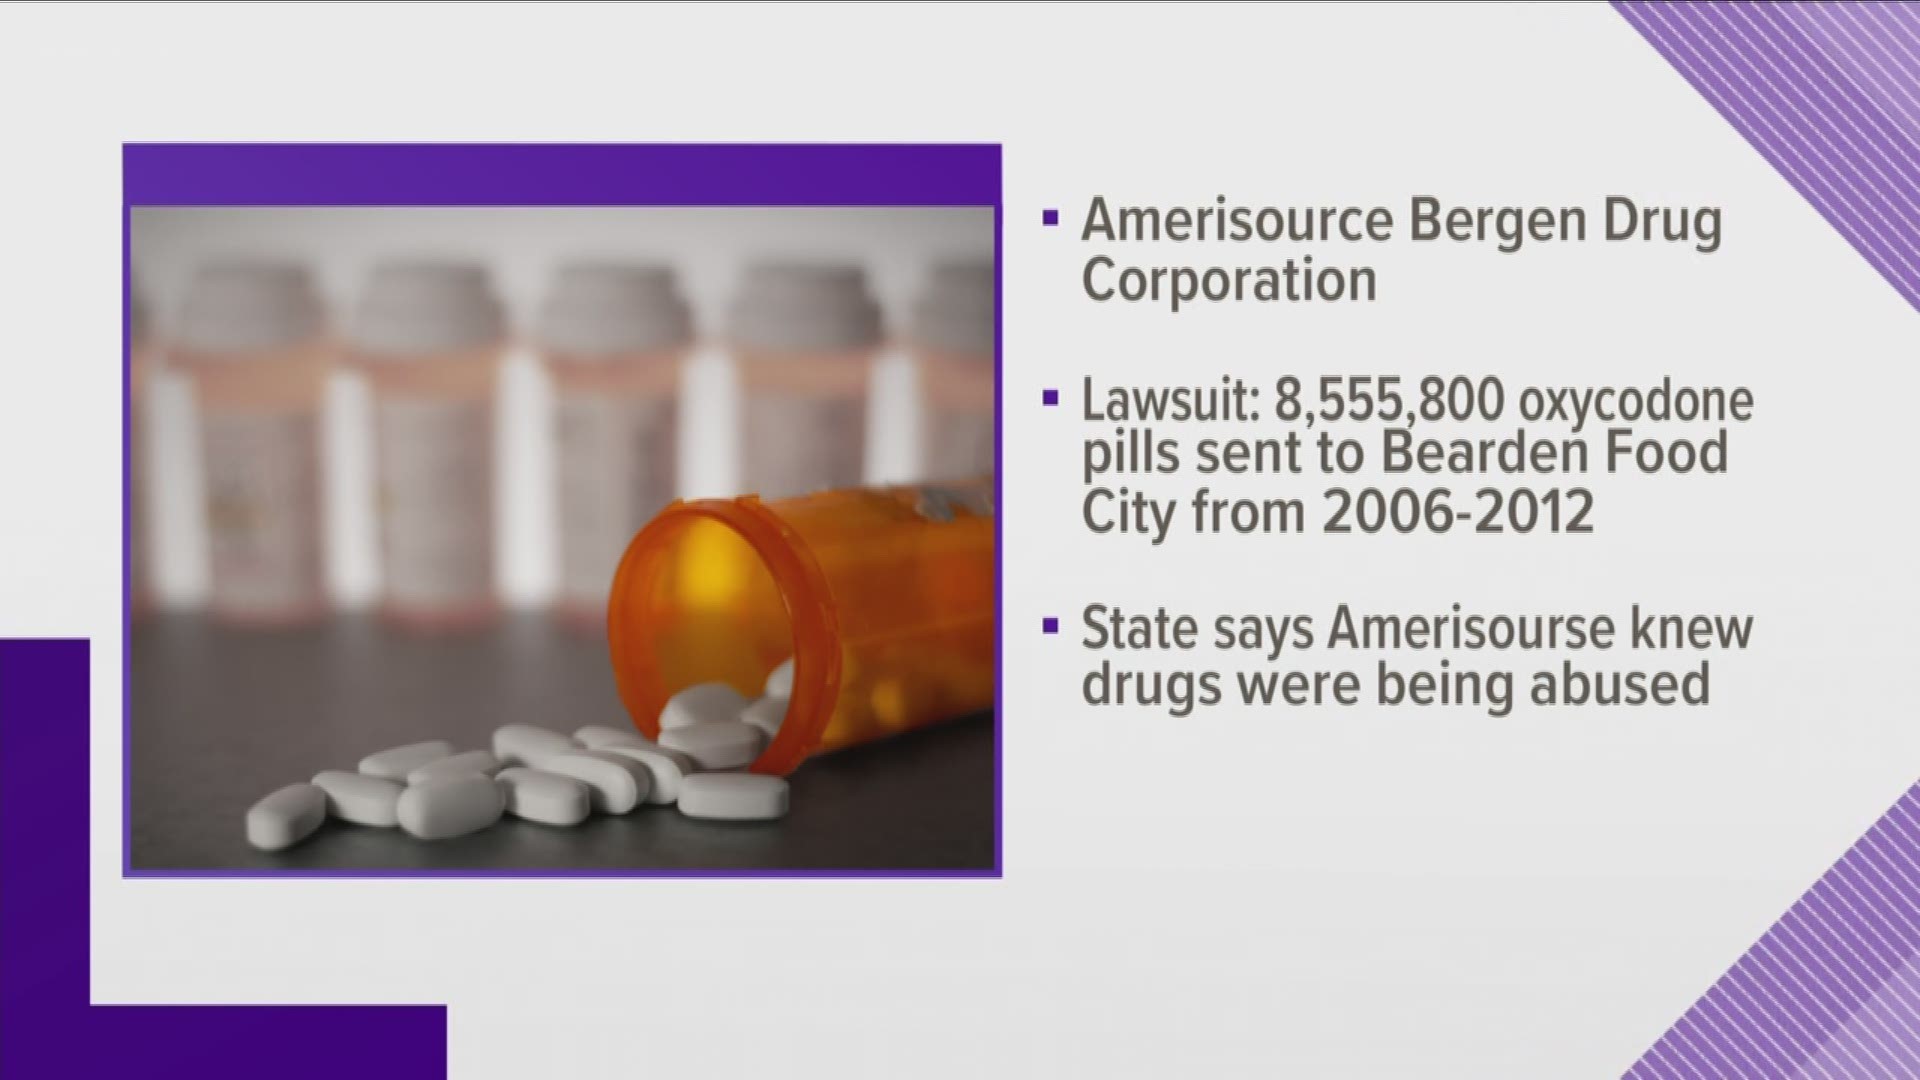 AmerisourceBergen distributed more than 8.5 million oxycodone pills at a Knoxville Food City